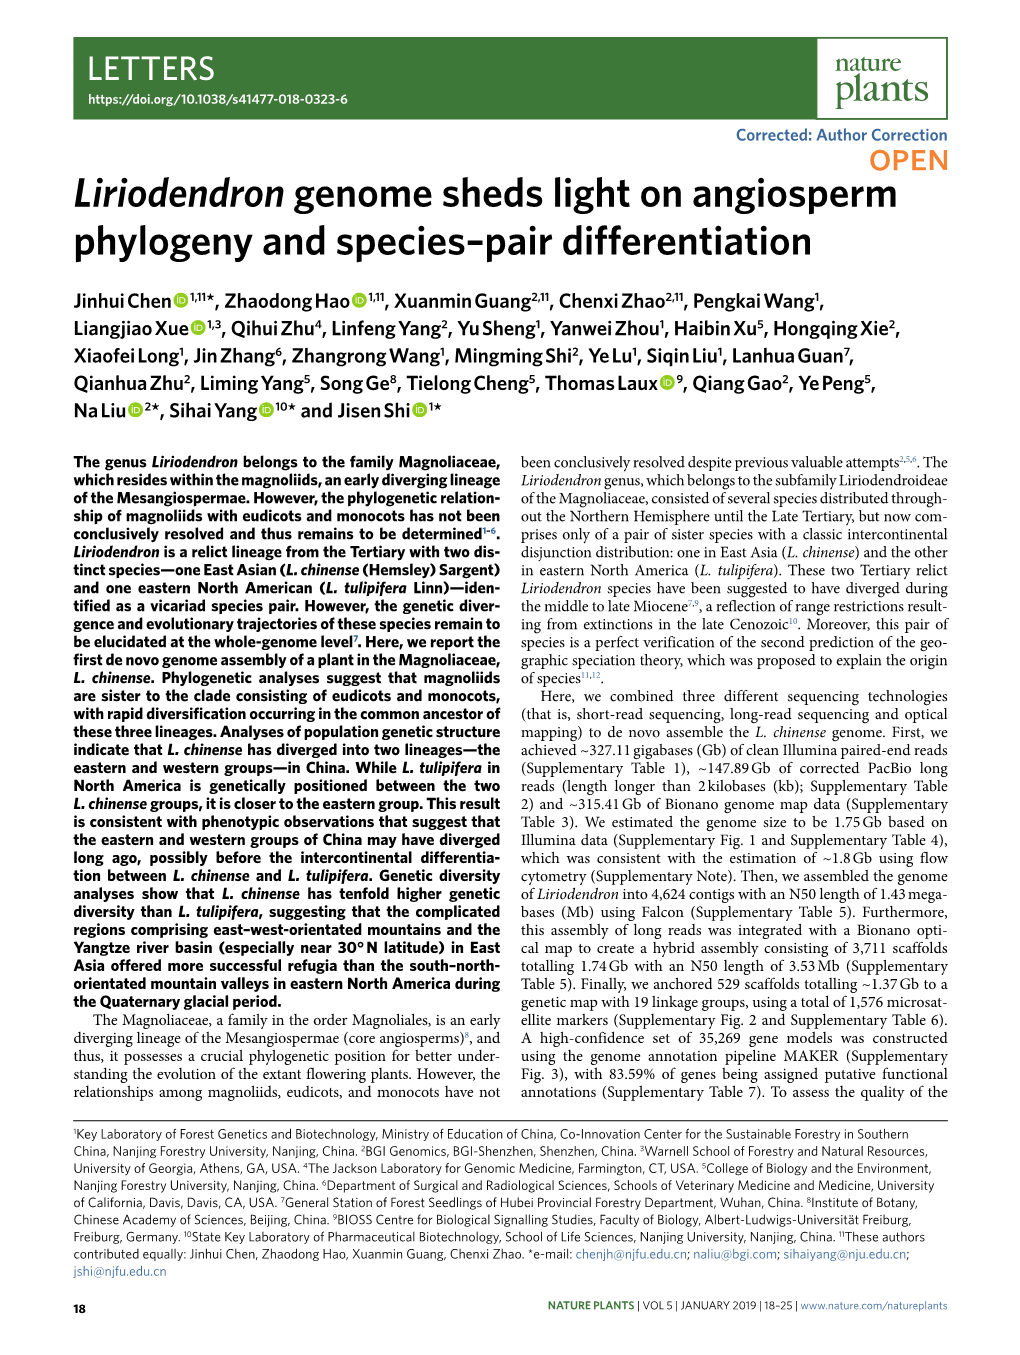 Liriodendron Genome Sheds Light on Angiosperm Phylogeny and Species–Pair Differentiation